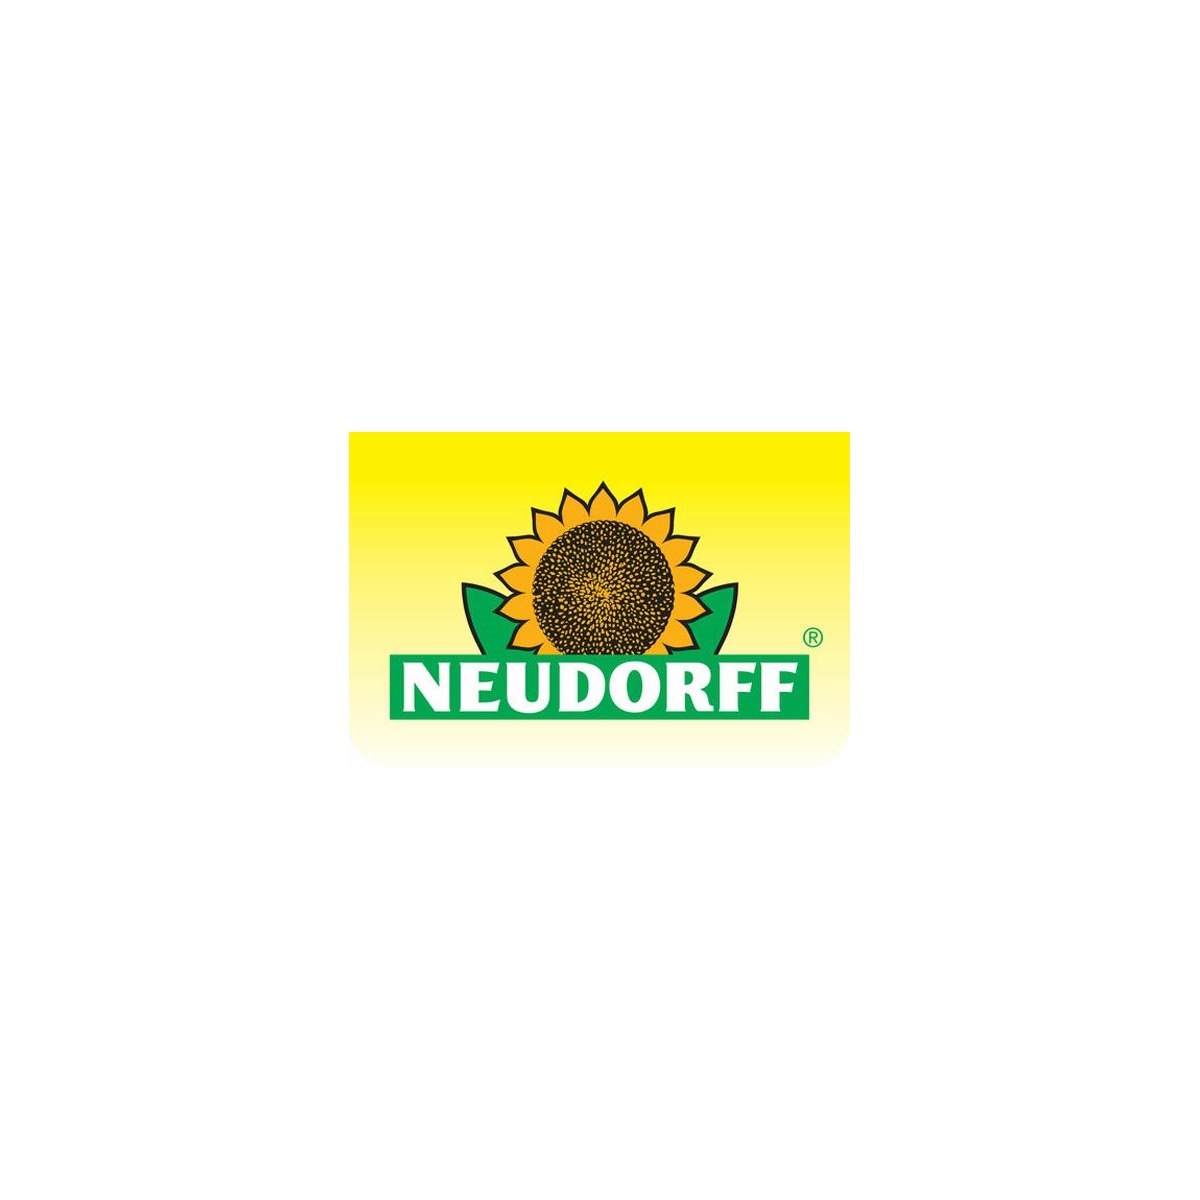 Where to Buy Neudorff Products